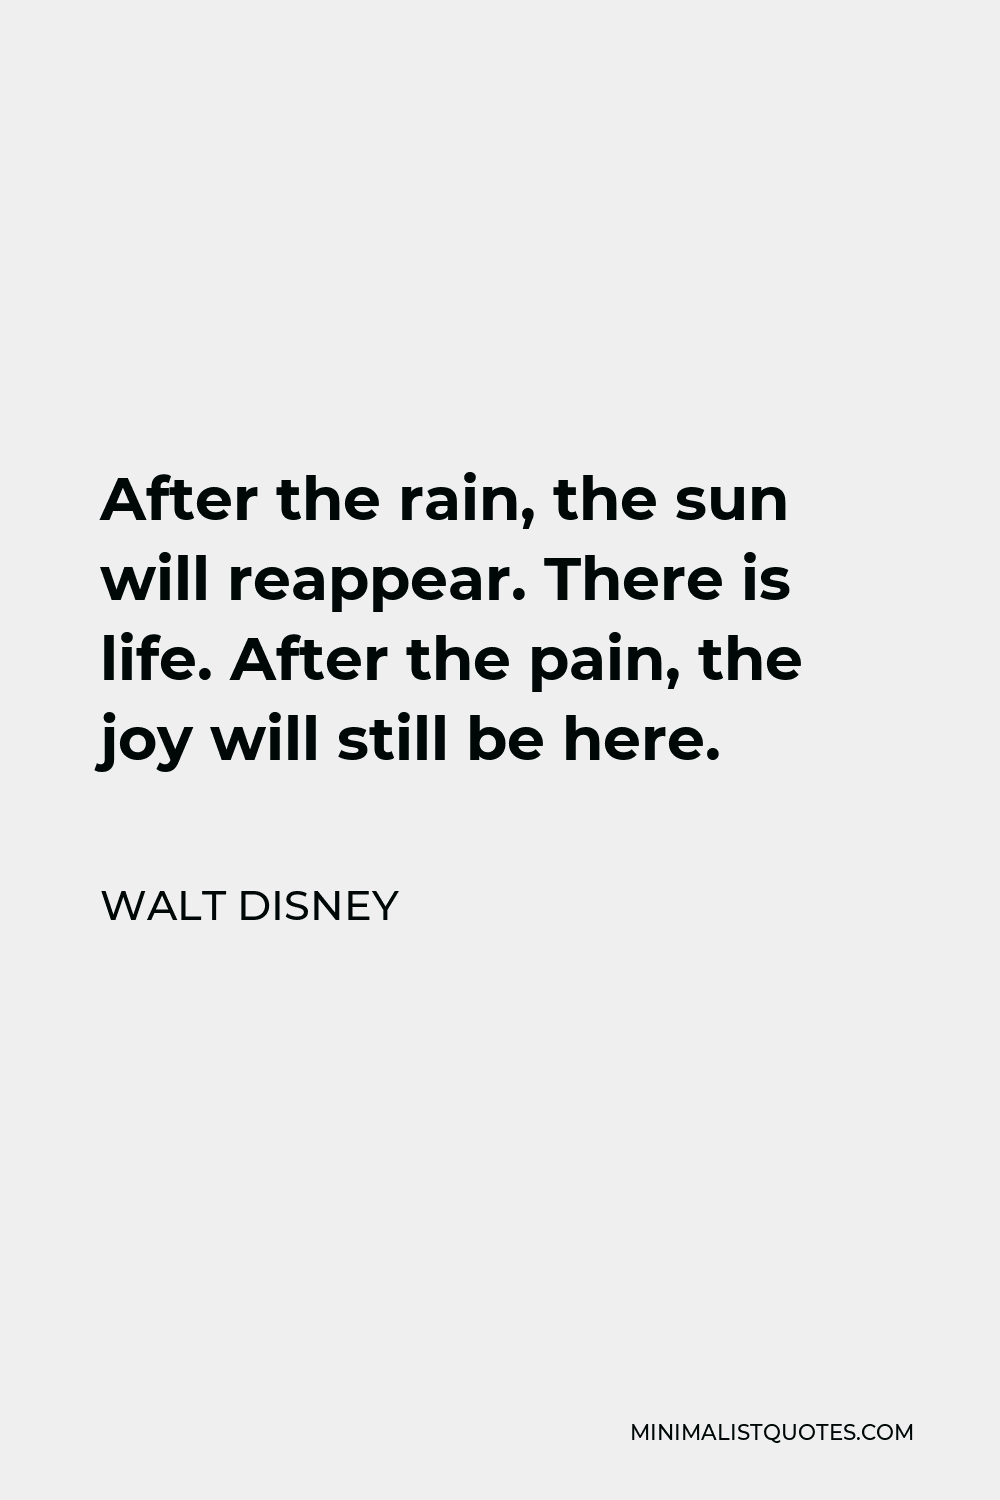 Walt Disney Quote: After the rain, the sun will reappear. There is life ...